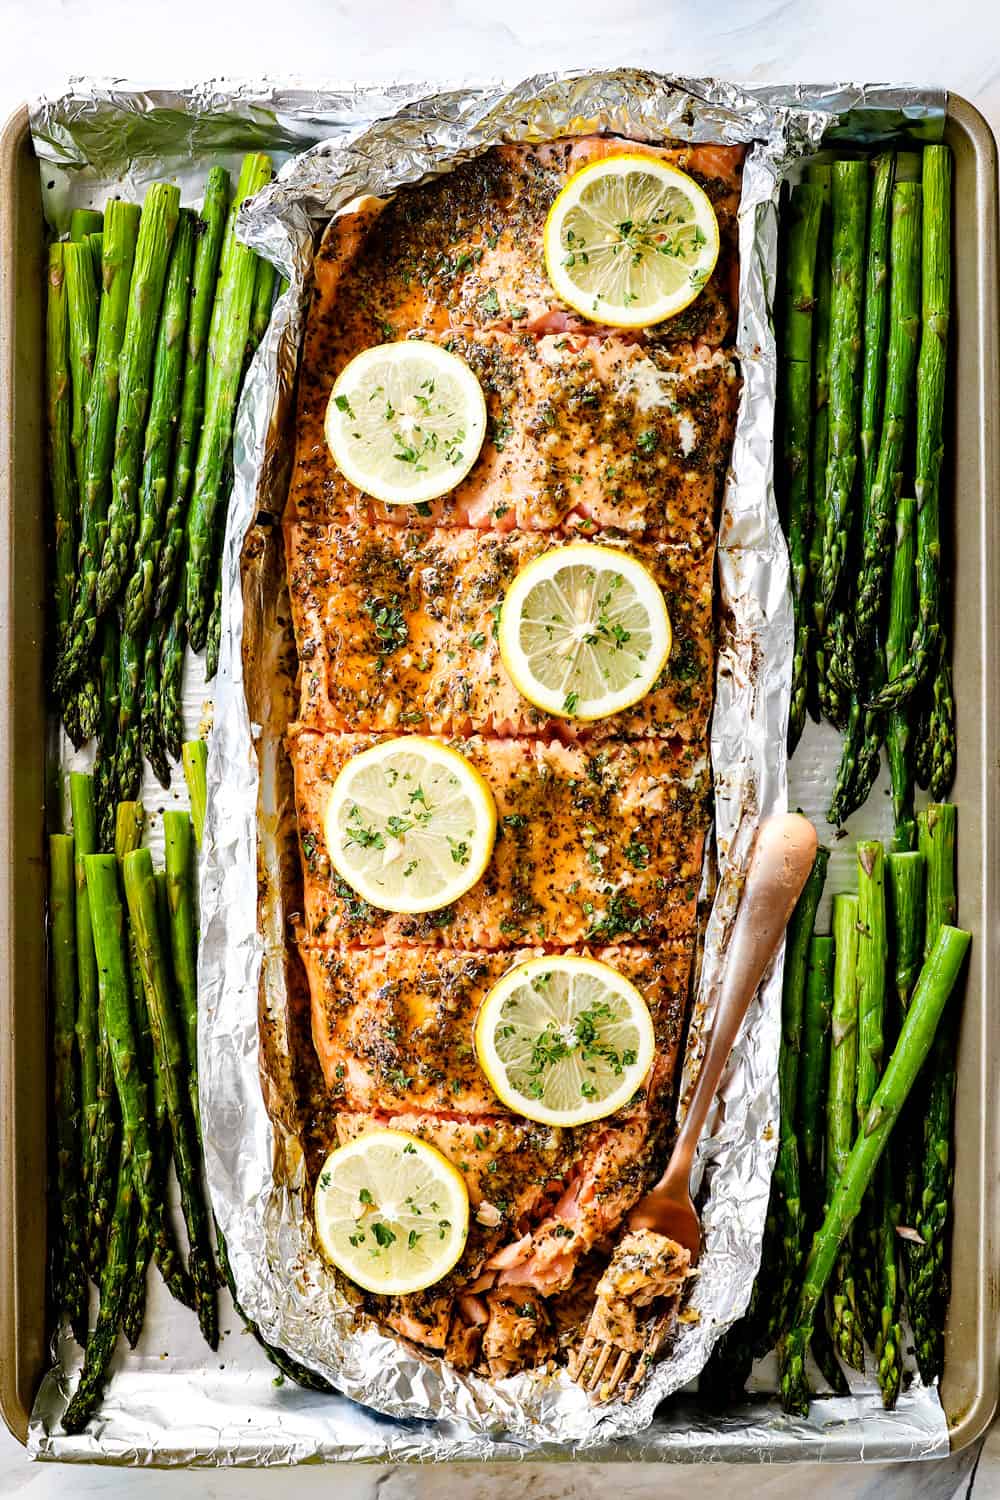 top view of baked lemon pepper salmon recipe with asparagus